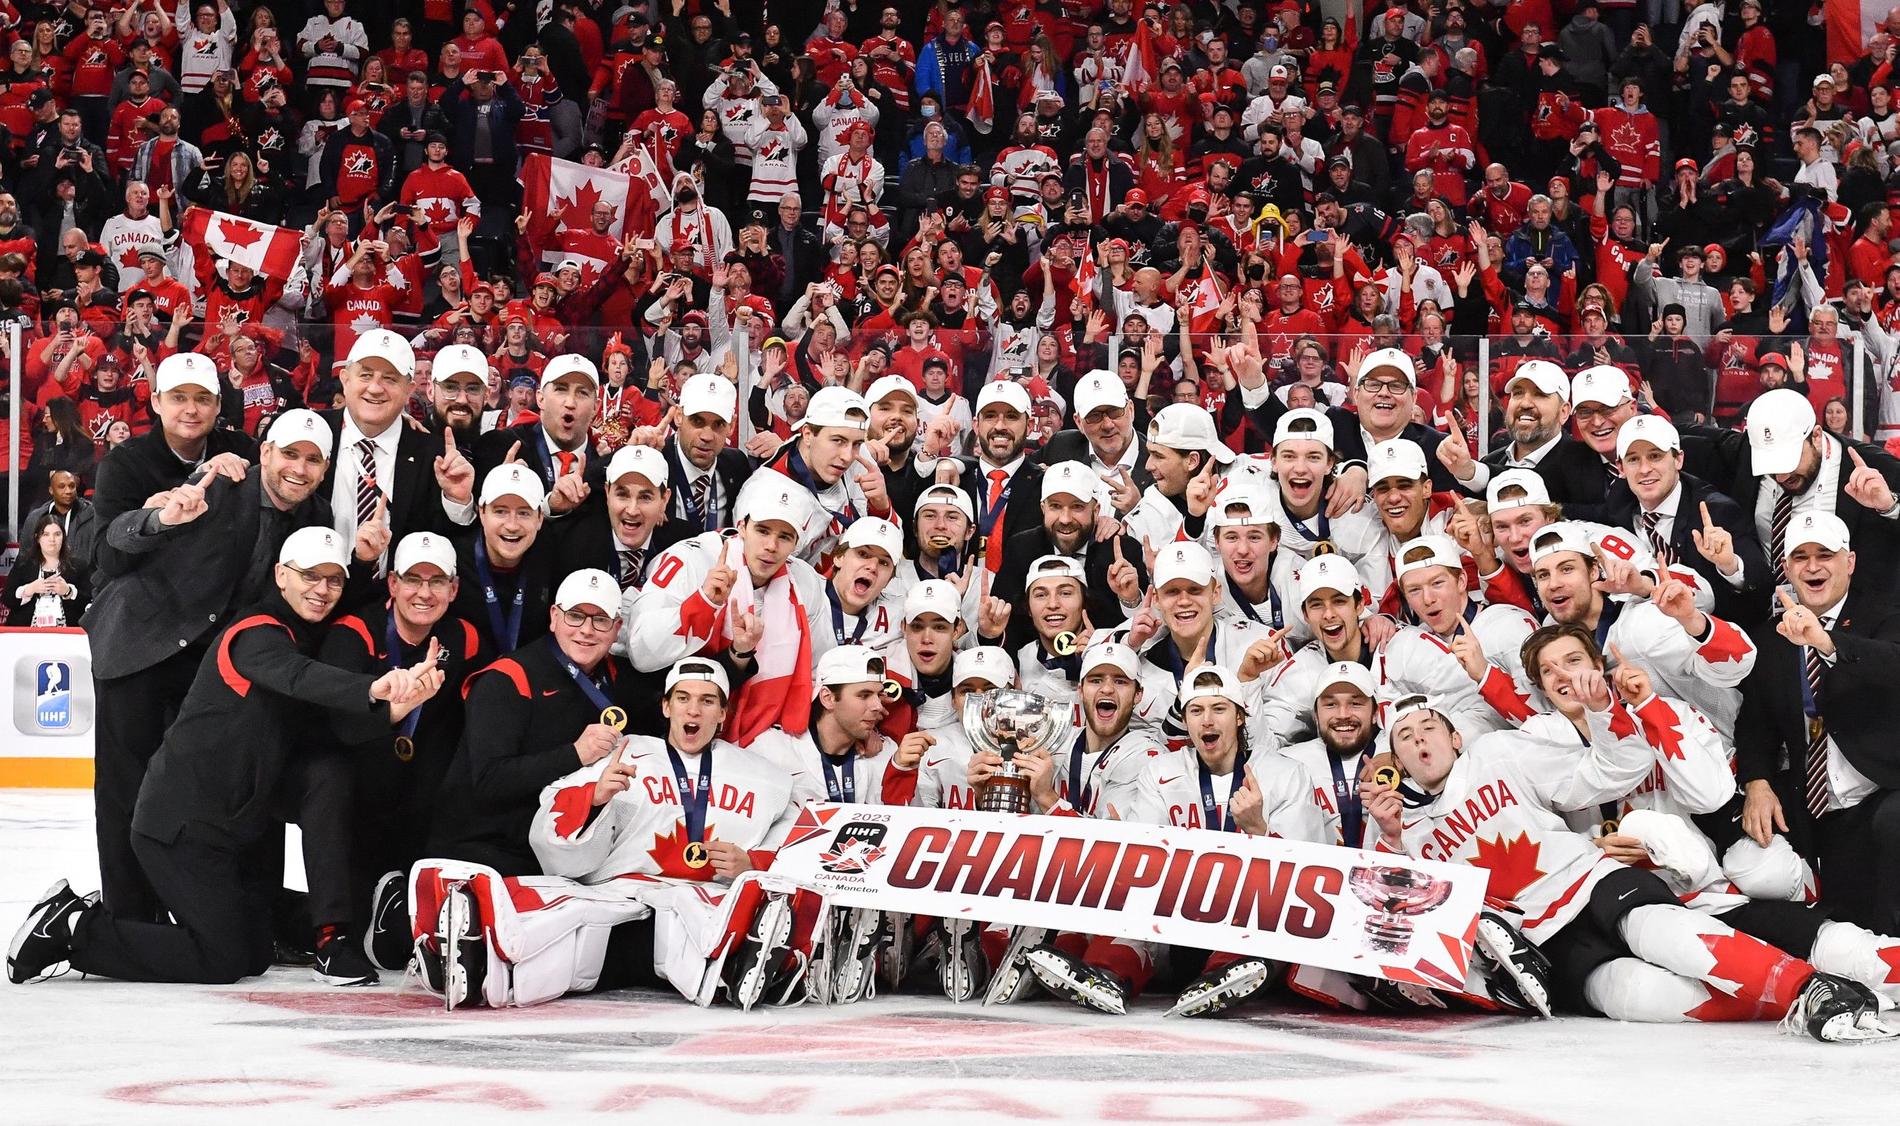 Canada once again won the World Junior Championship – TB